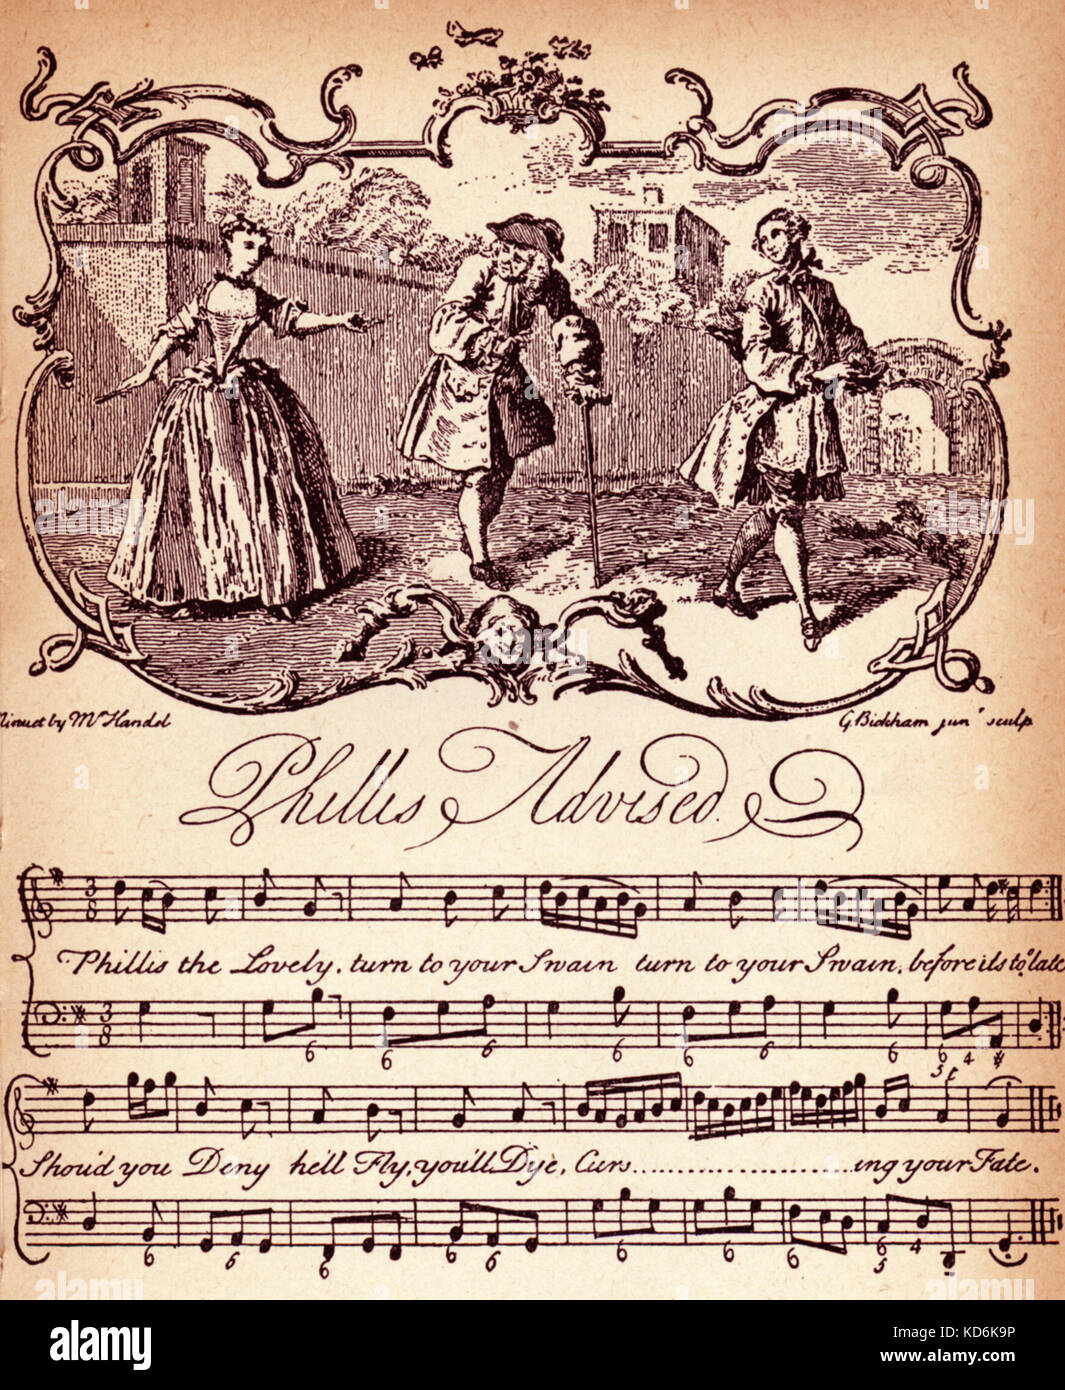 'Phillis Advised', minuet by Handel. Illustrated score page with lyrics. From Bicham's musical entertainer, 1738.   German-English composer, 1685 -1759. Stock Photo